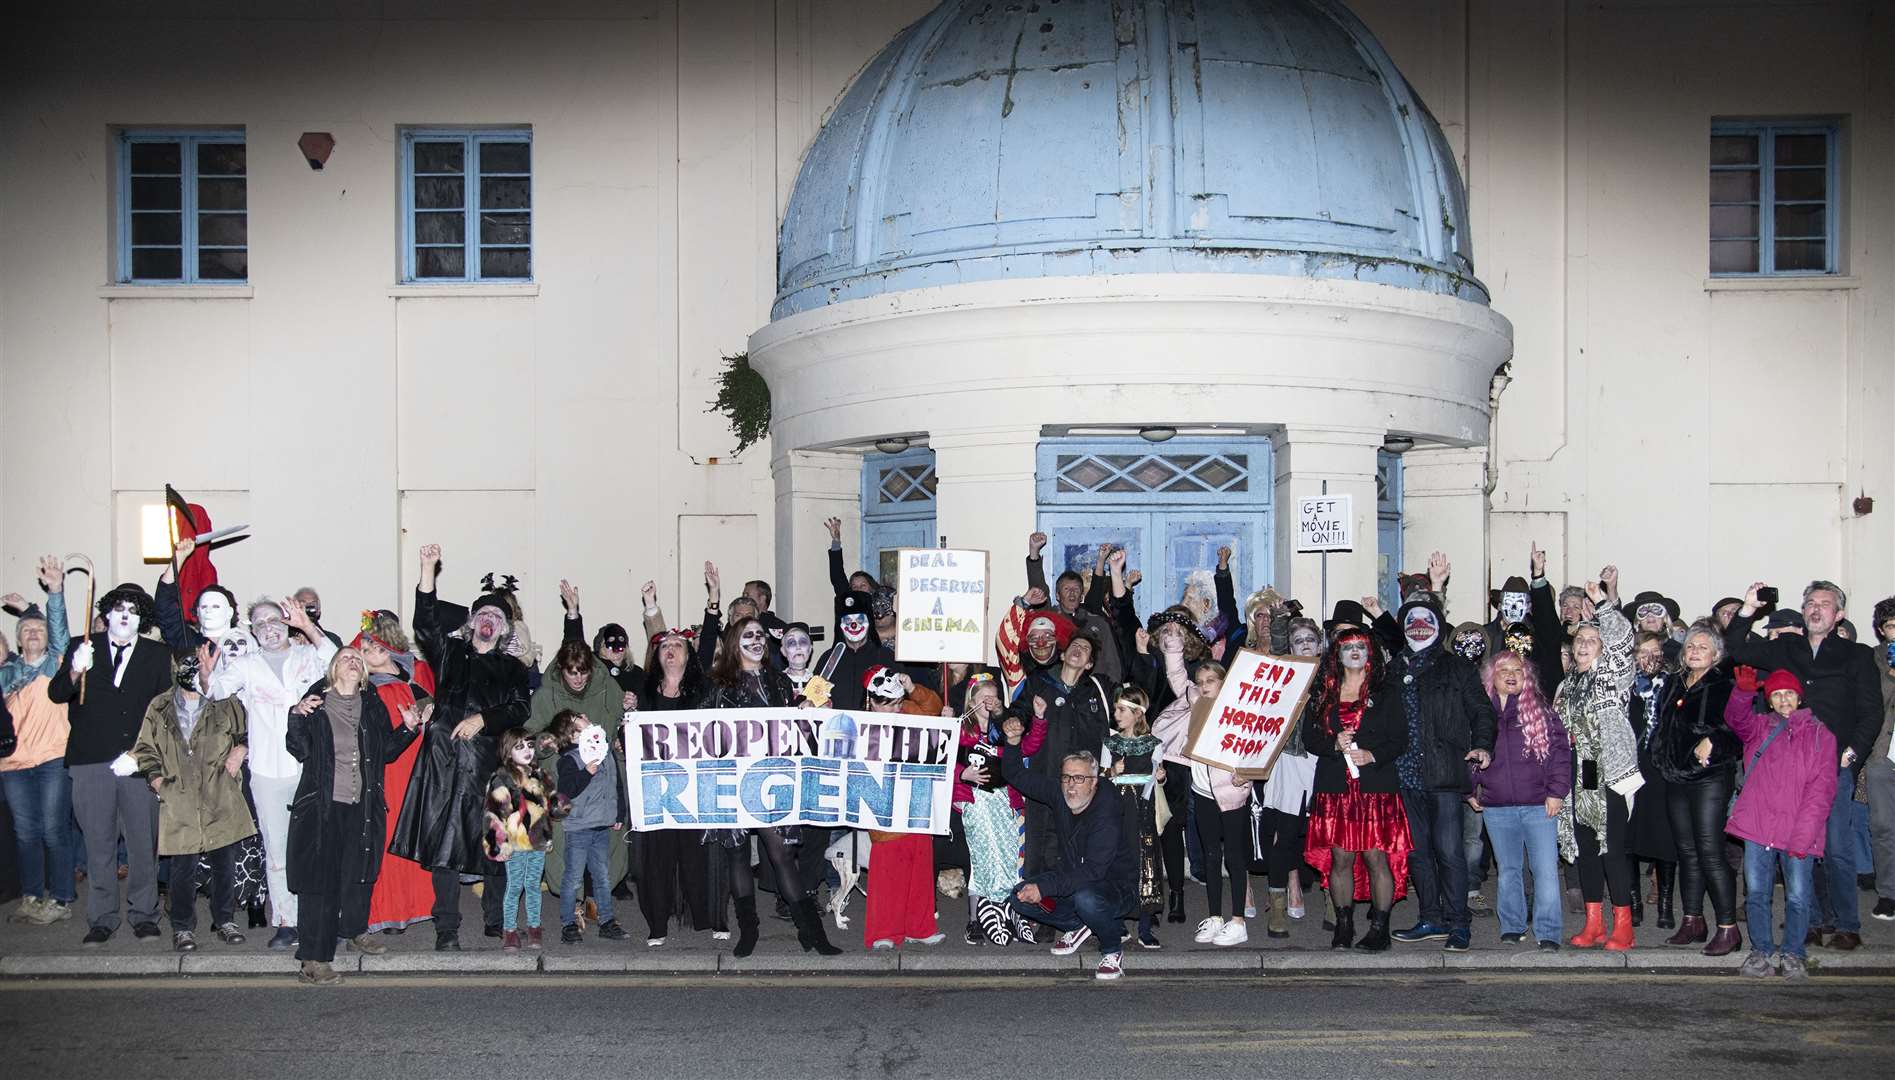 Up to 200 Reopen the Regent campaigners held a Halloween protest outside the former bingo hall Picture: Jody Stewart